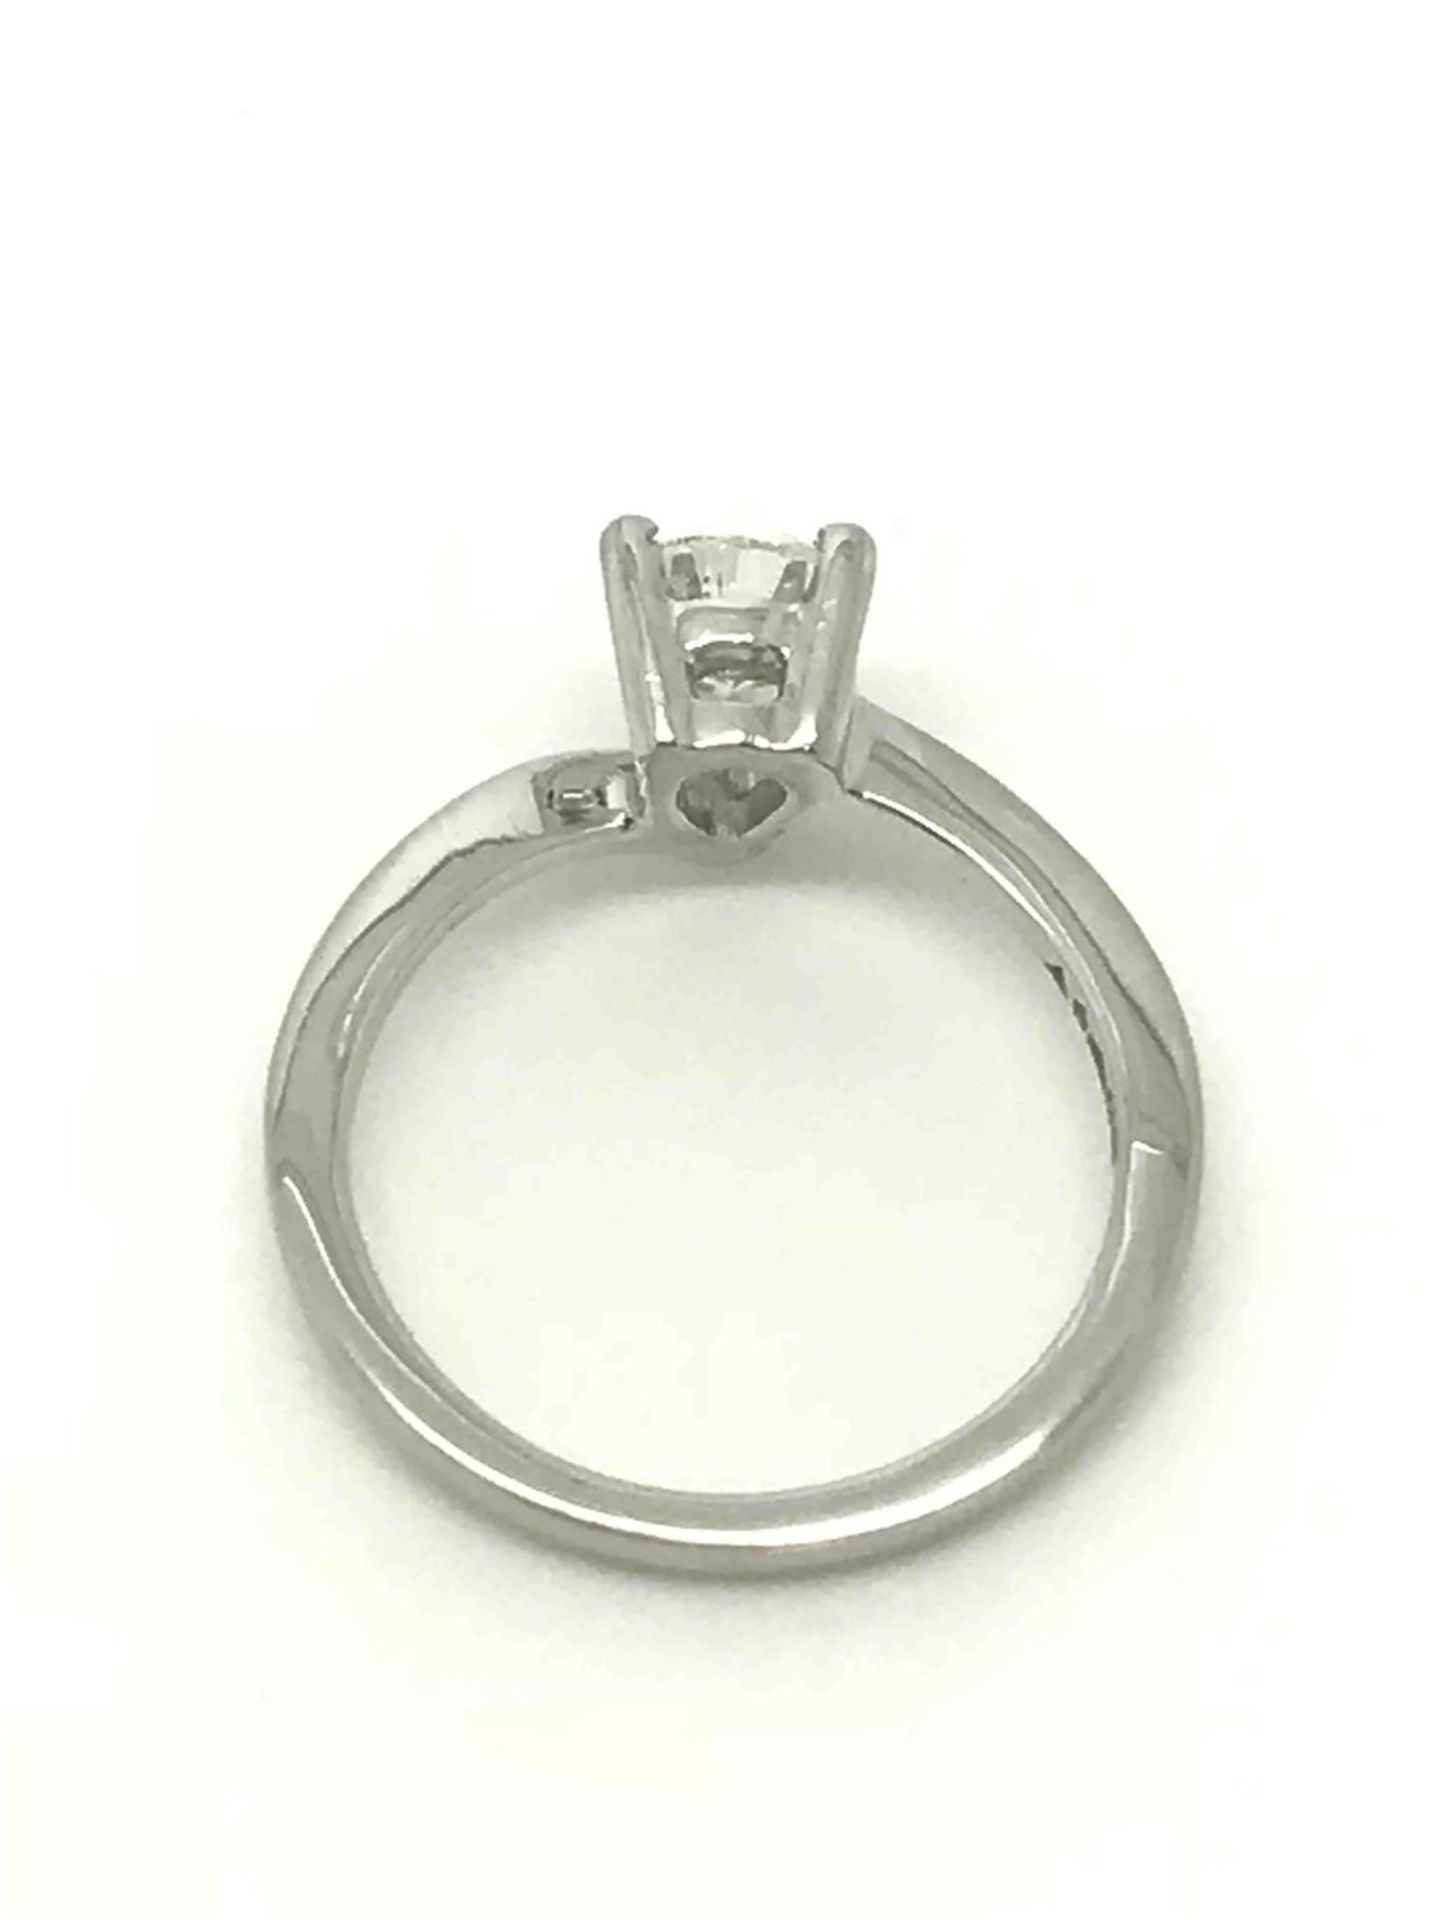 EGL Certificated 0.70ct Pear Cut Diamond Single Stone Ring - Image 3 of 5